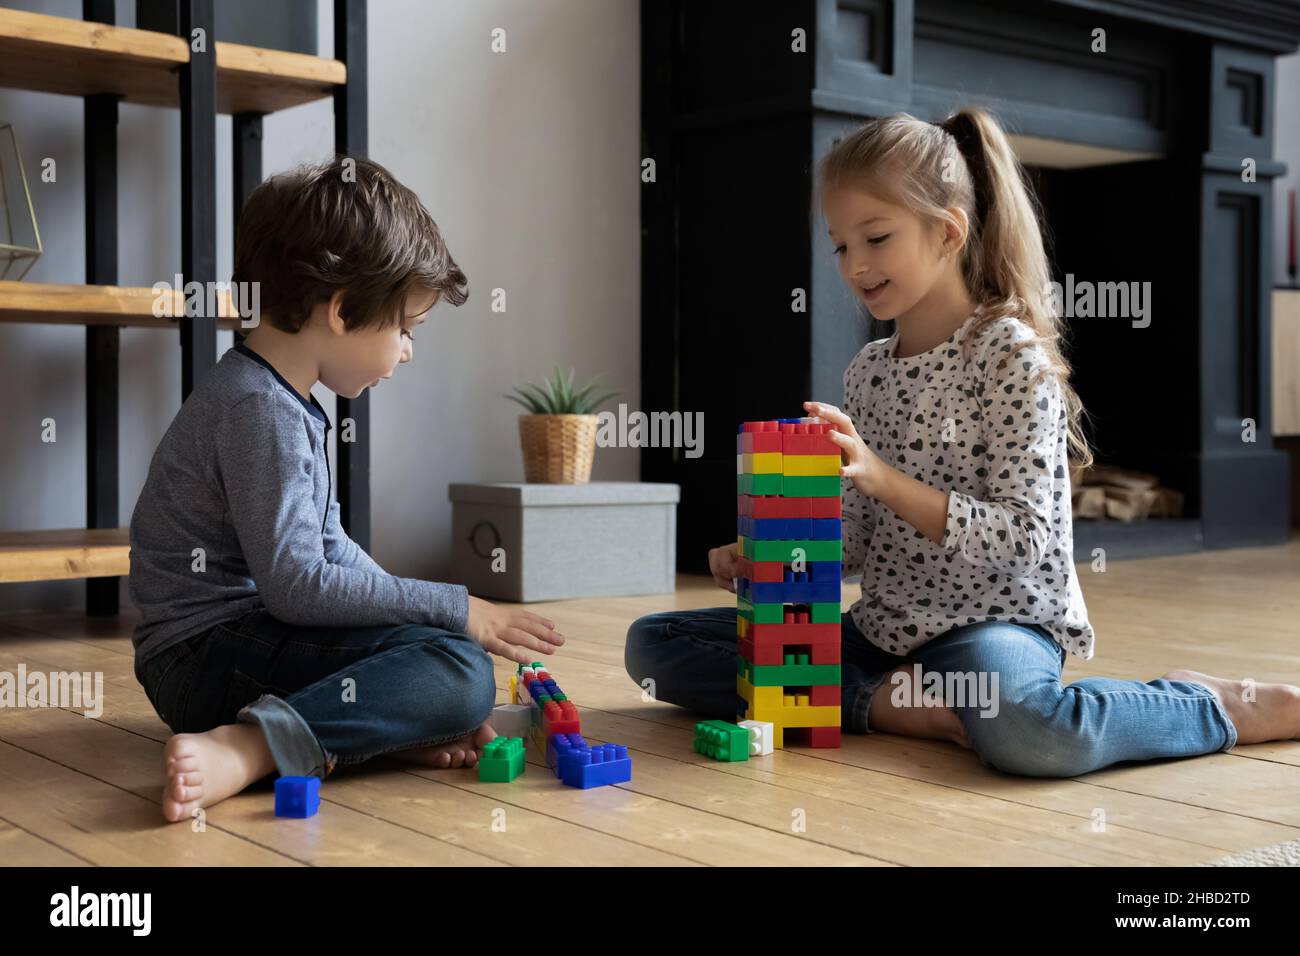 Happy sister and brother playing with colorful plastic construction toys Stock Photo